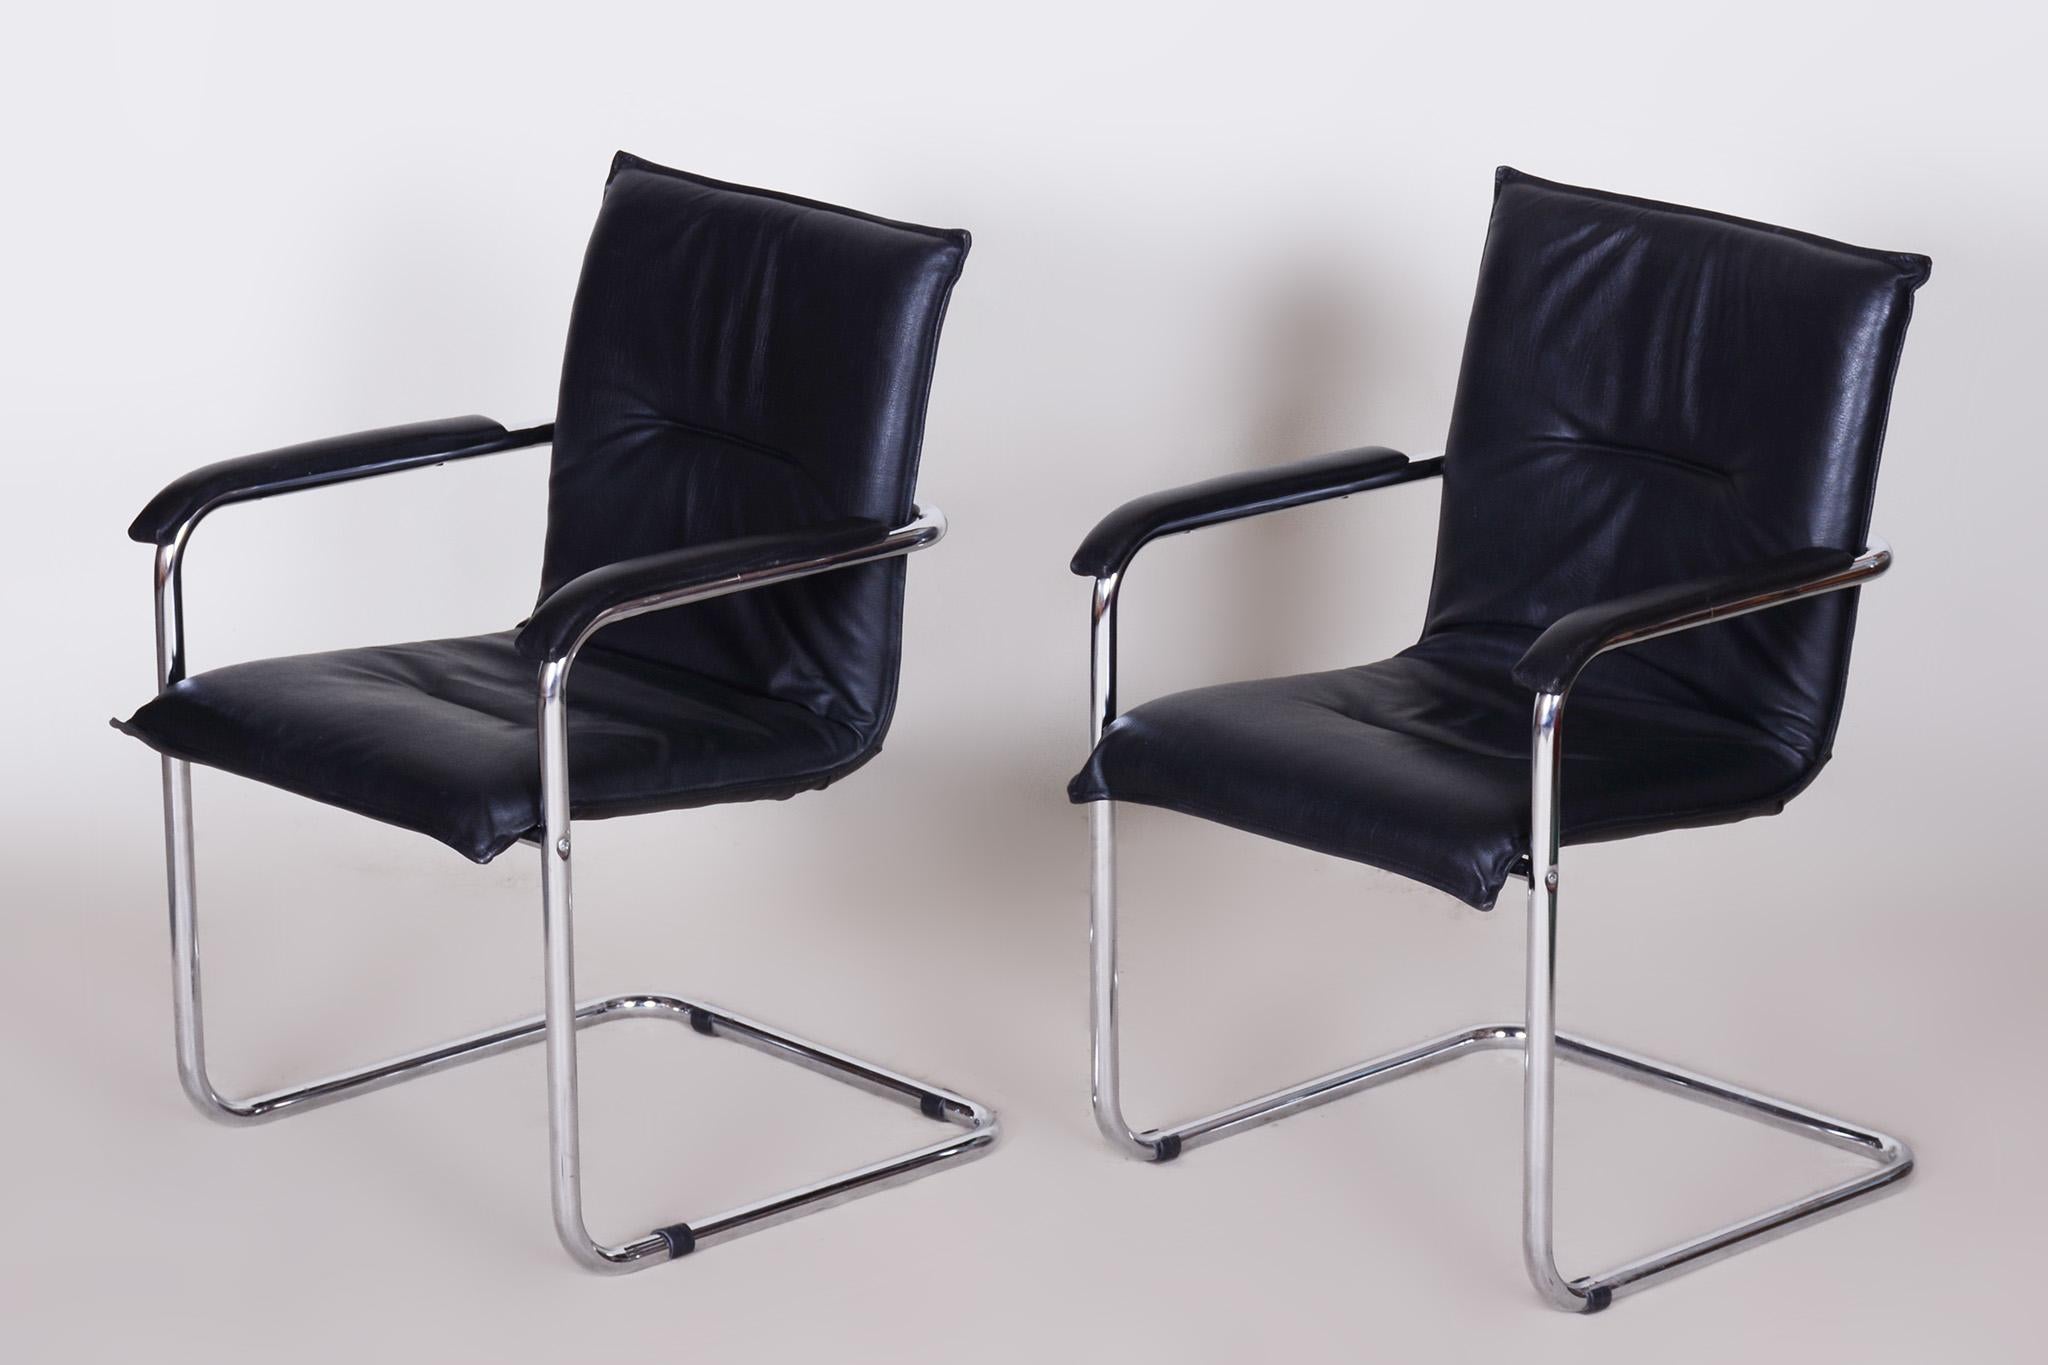 Pair of Black Bauhaus Chairs, Artificial Leather, 1970s, Germany For Sale 1